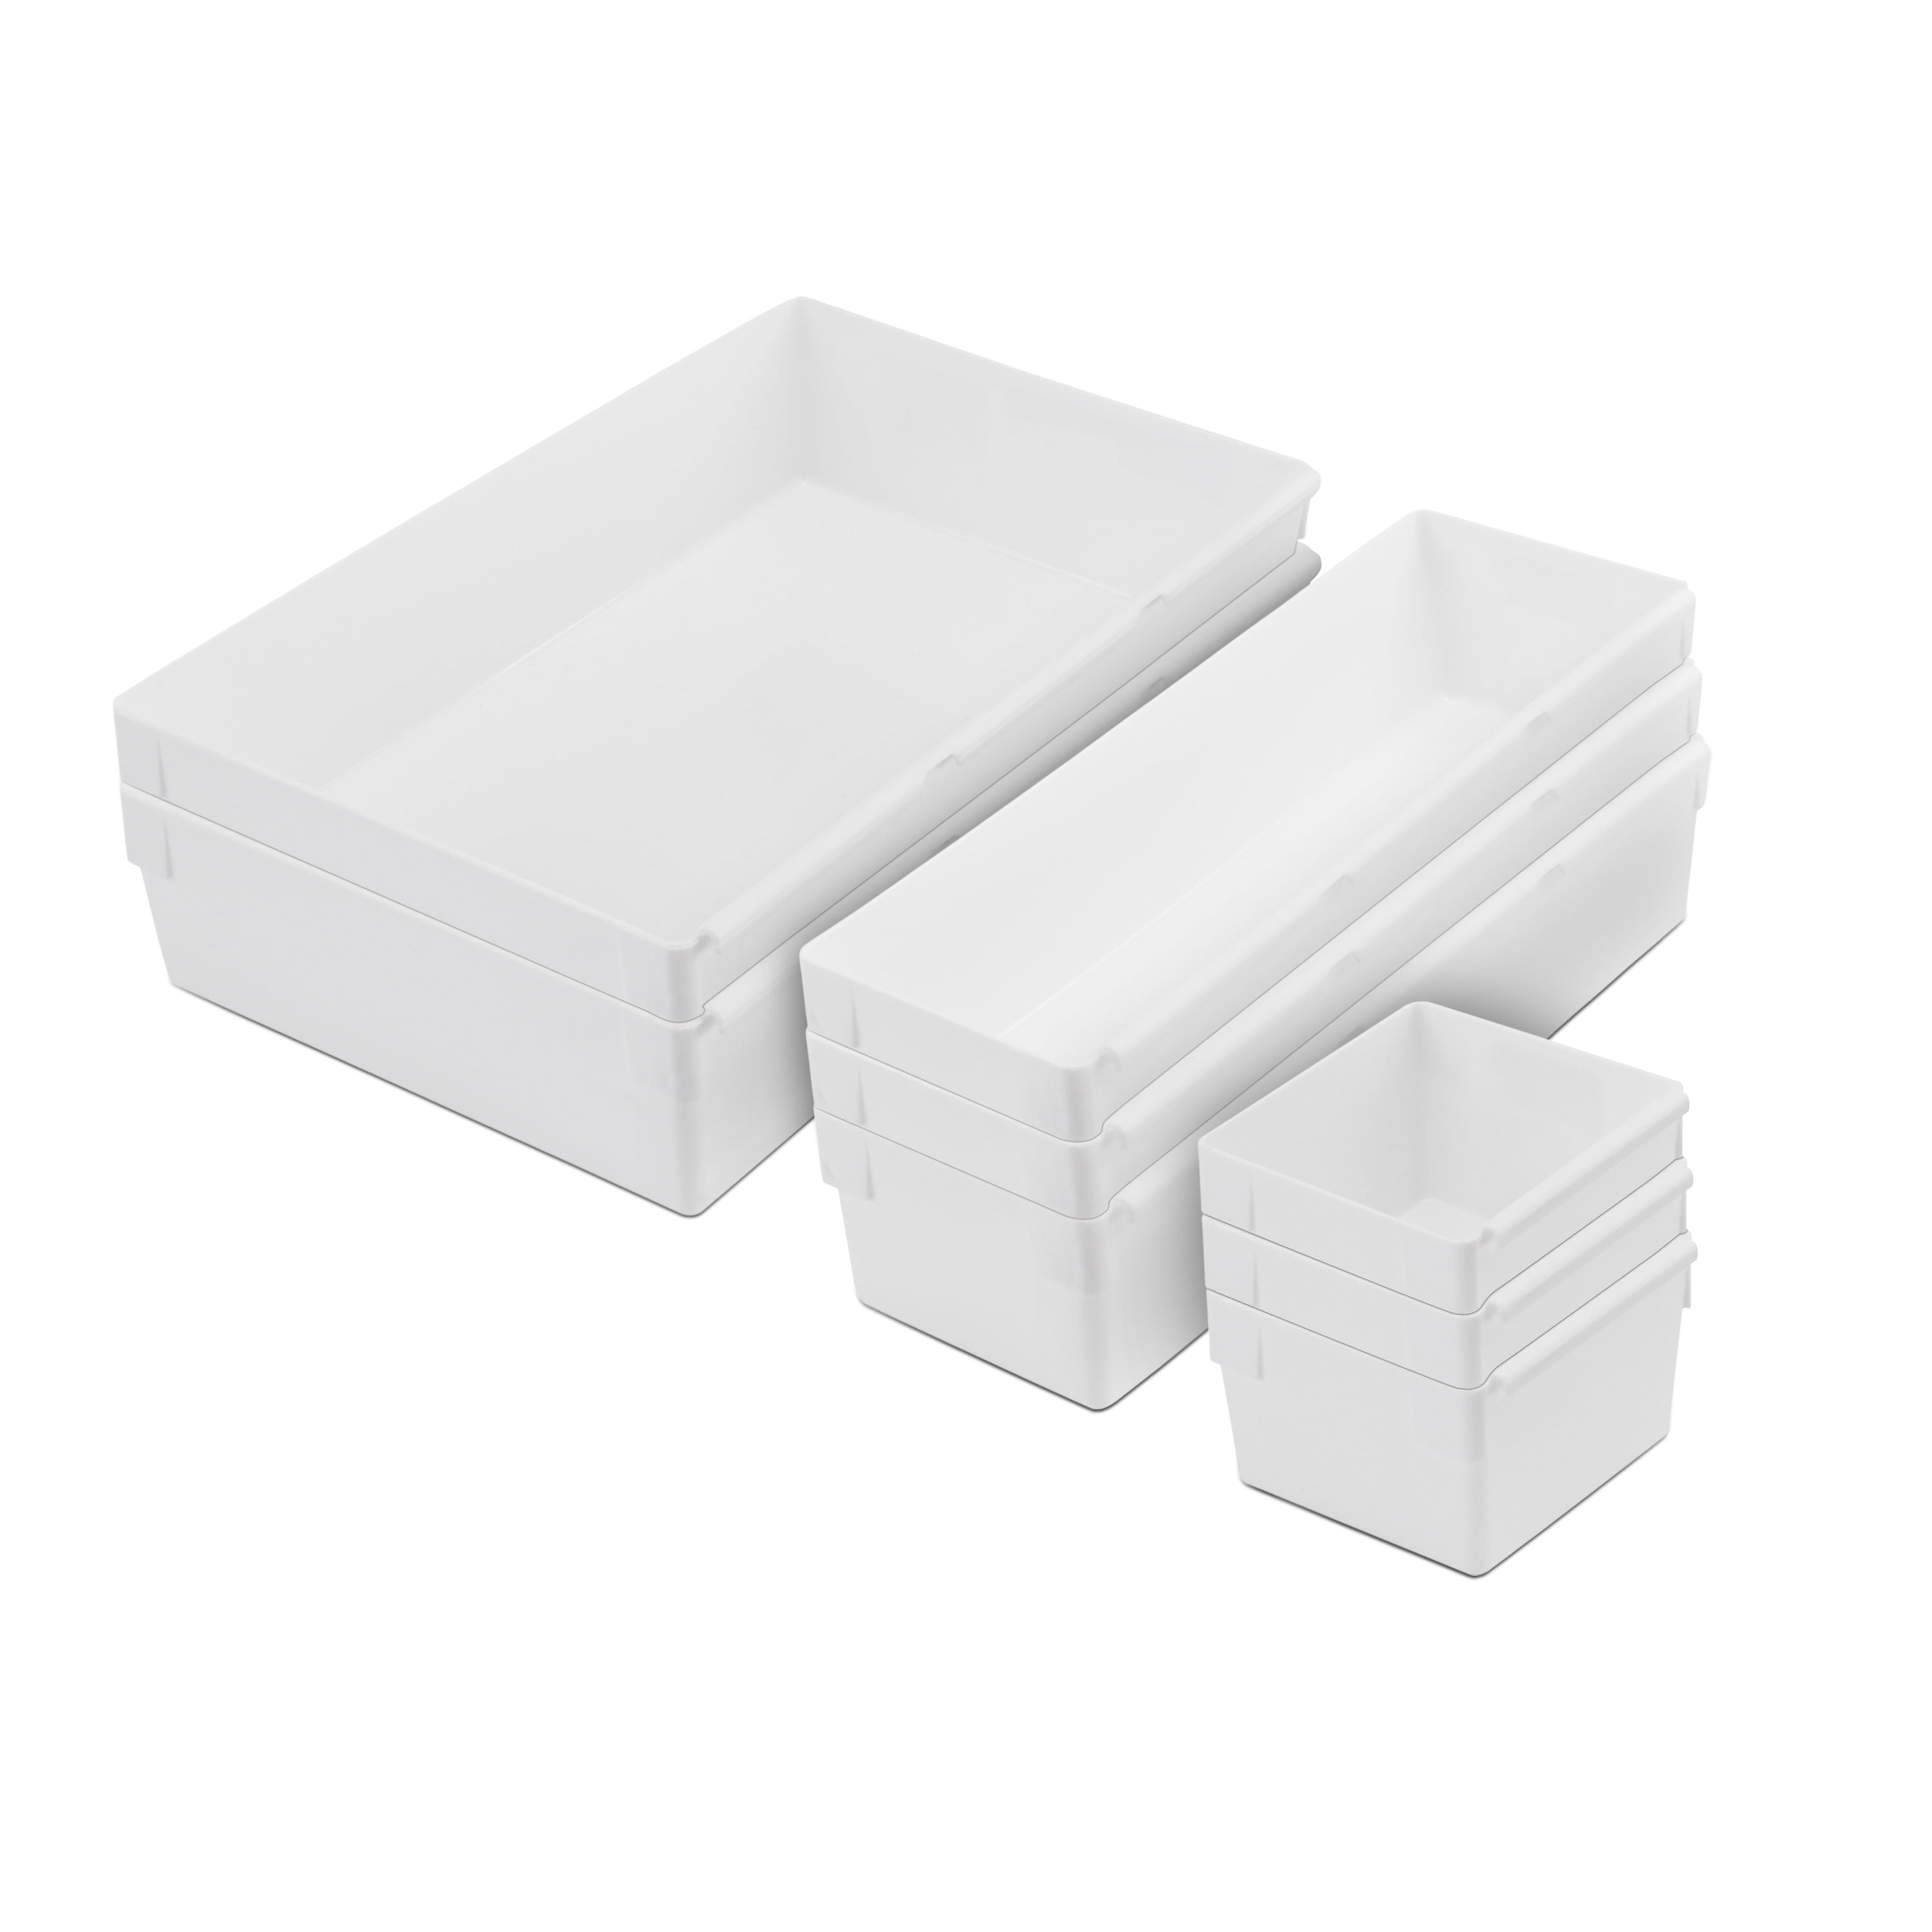 Rubbermaid Drawer Organizer Containers, Modular and Customizable, 3